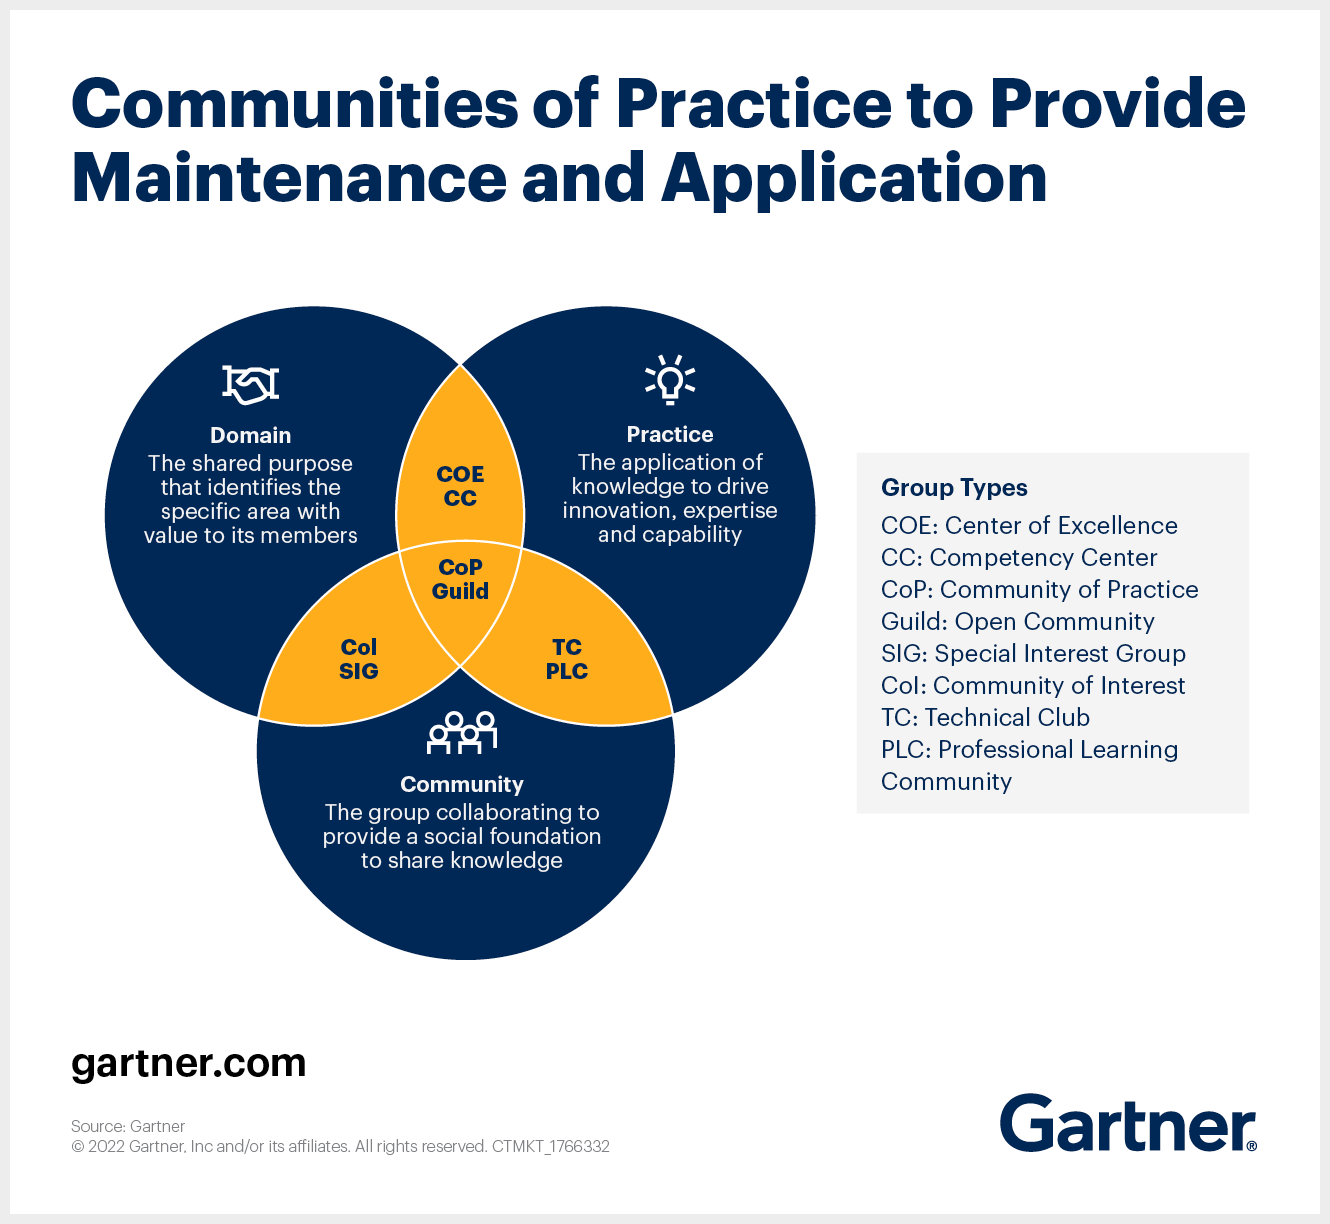 Communities of Practice to Provide Maintenance and Application